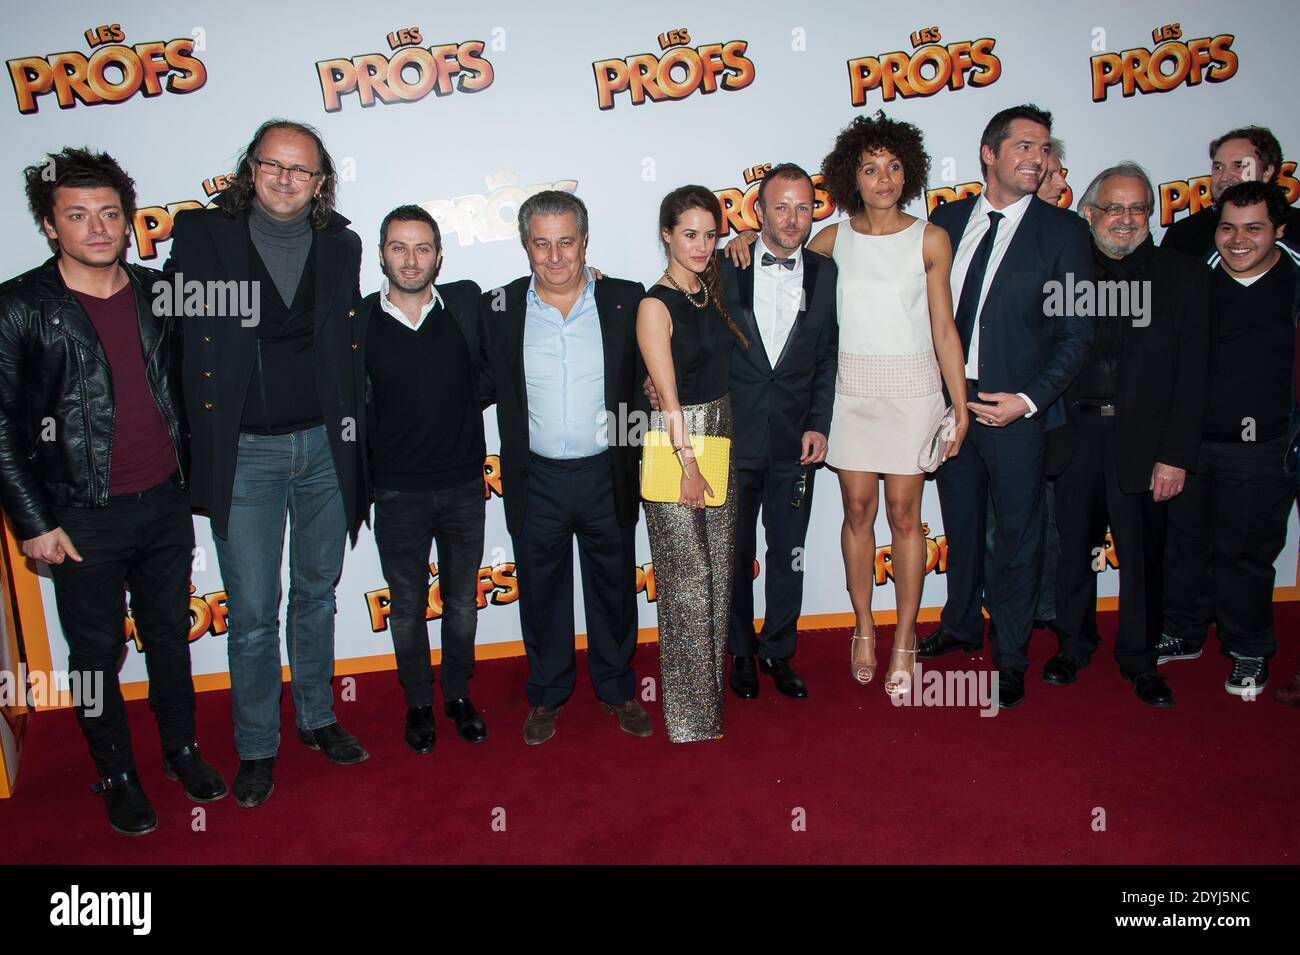 Cast of the movie including Director Pierre-Francois Martin-Laval,  Christian Clavier, Isabelle Nanty, Kev Adams, Stefi Celma, Alice David,  Arnaud Ducret, Francois Morel and Raymond Bouchard attending the premiere  of 'Les Profs' held